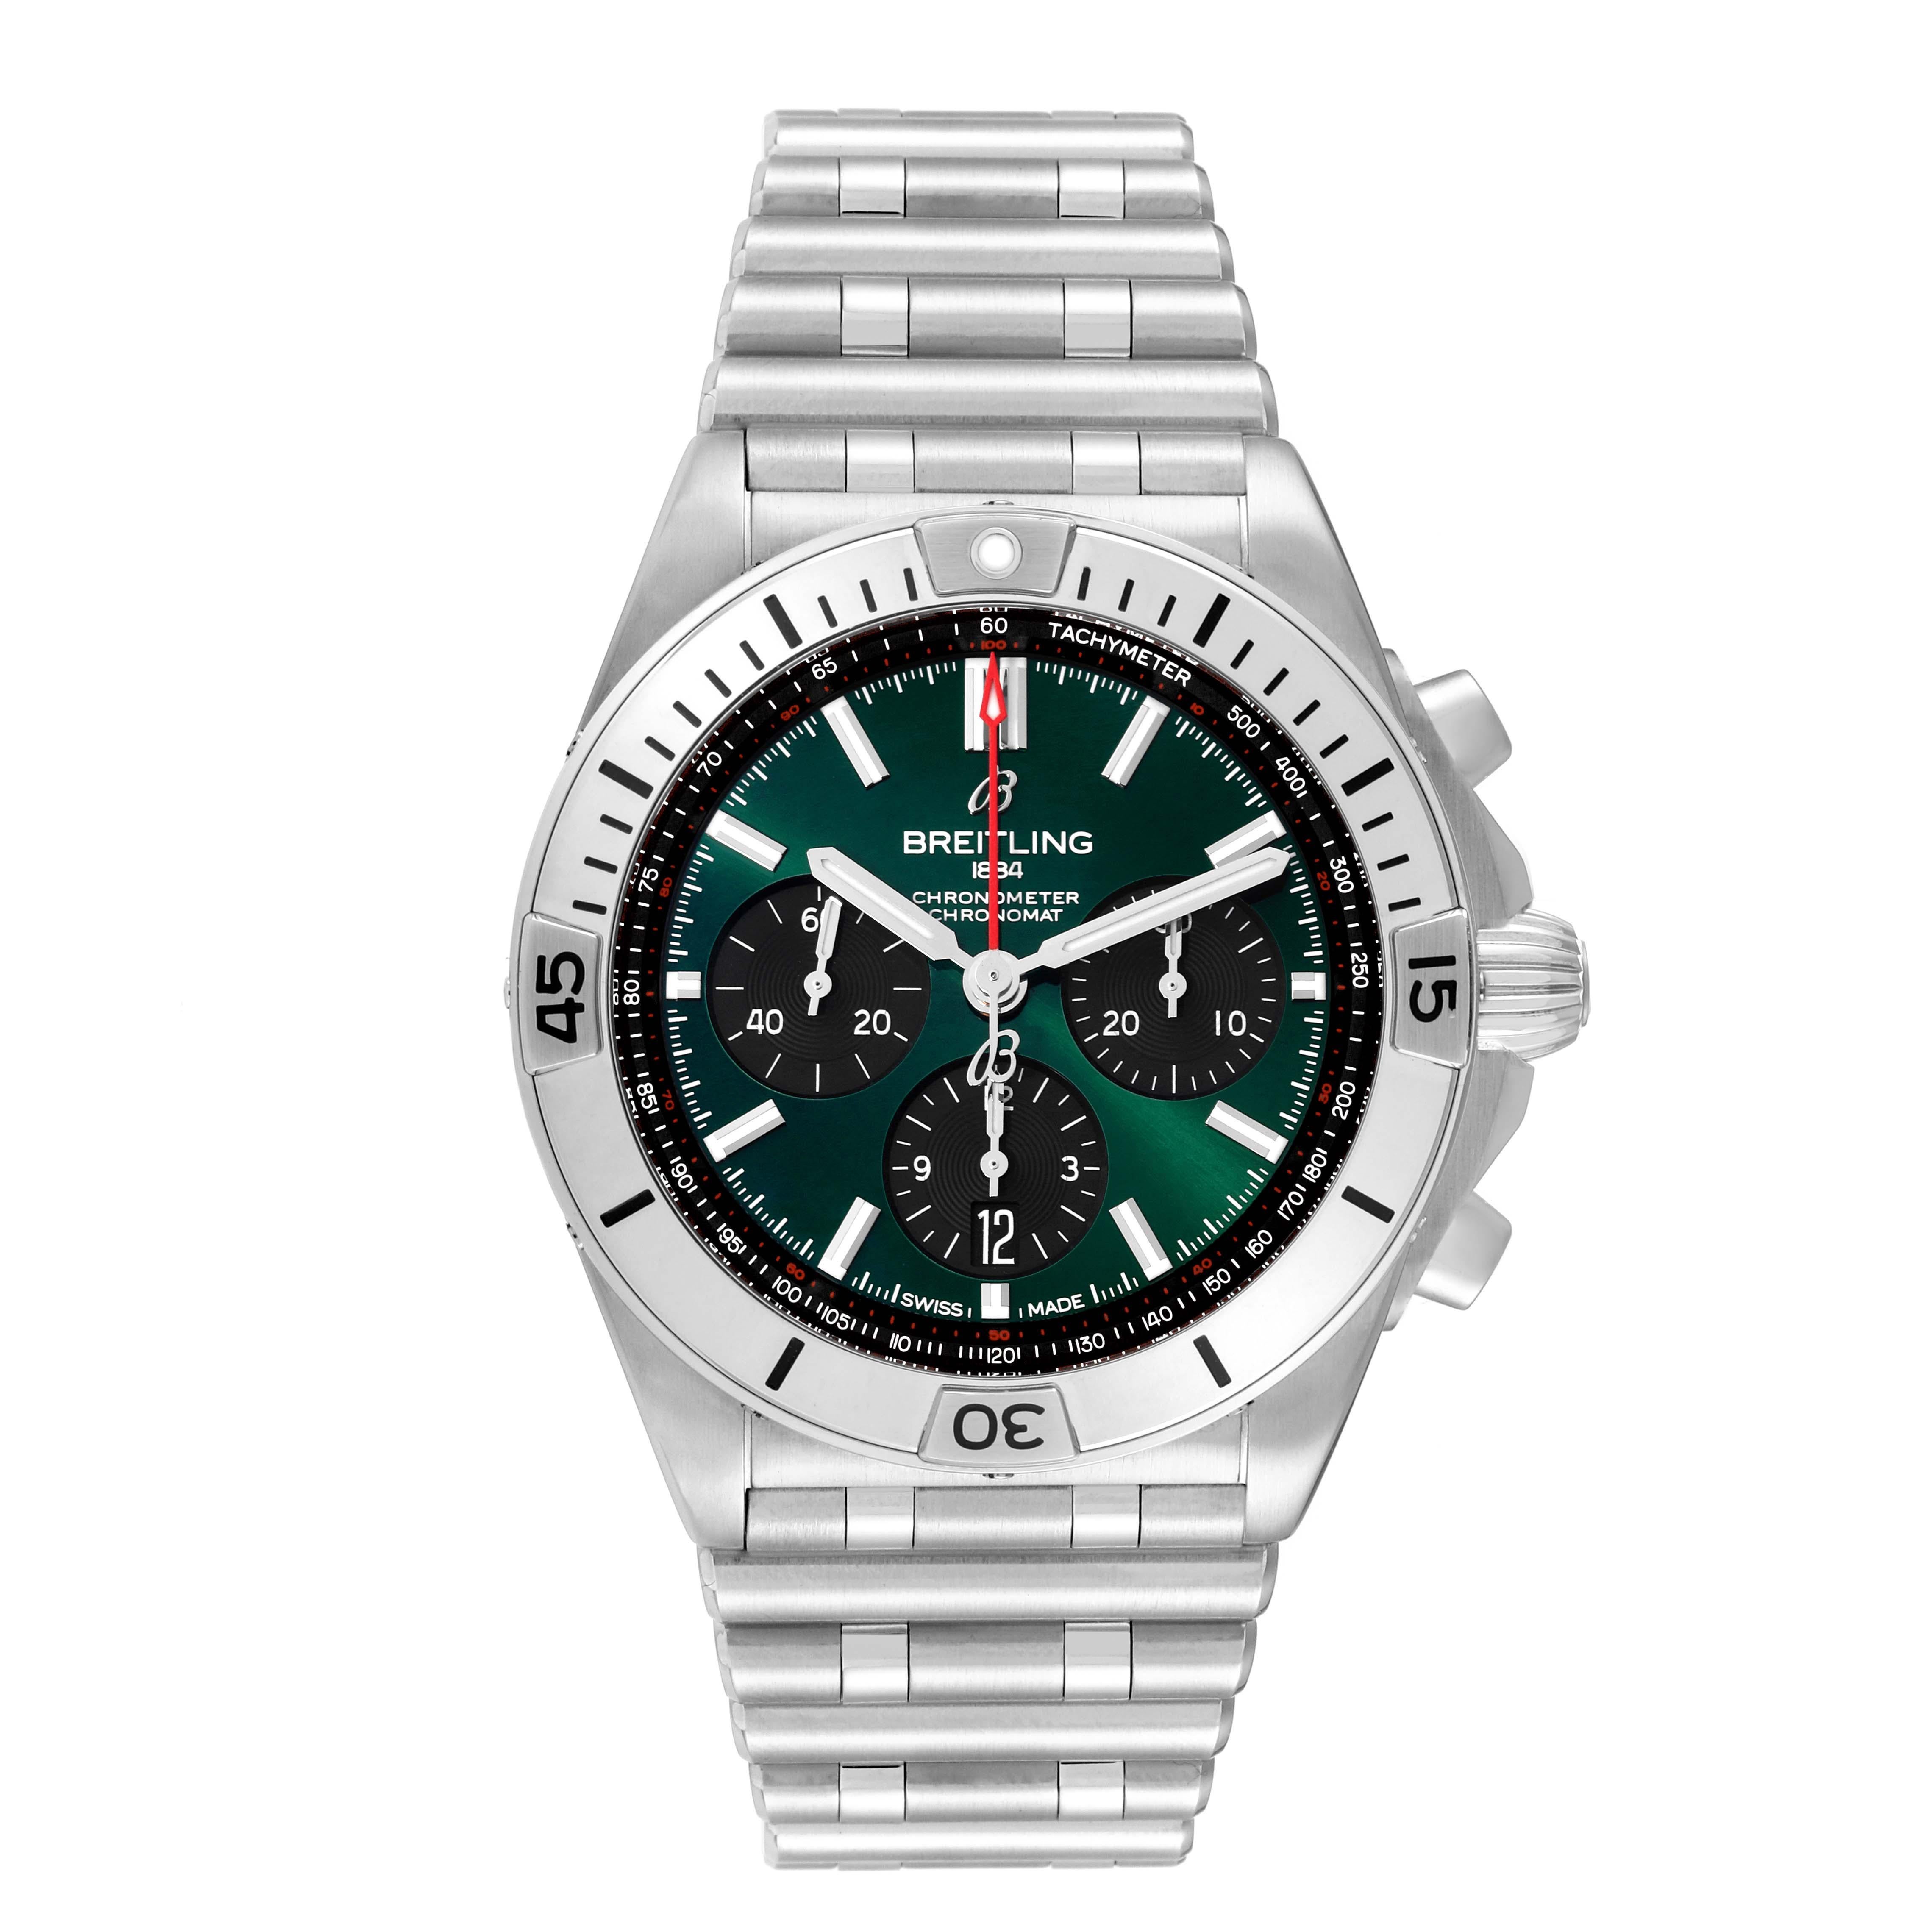 Breitling Chronomat B01 Green Dial Steel Mens Watch AB0134 Box Card. Self-winding automatic officially certified chronometer movement. Chronograph function. Stainless steel case 42.0 mm in diameter with screwed down crown and pushers. Stainless